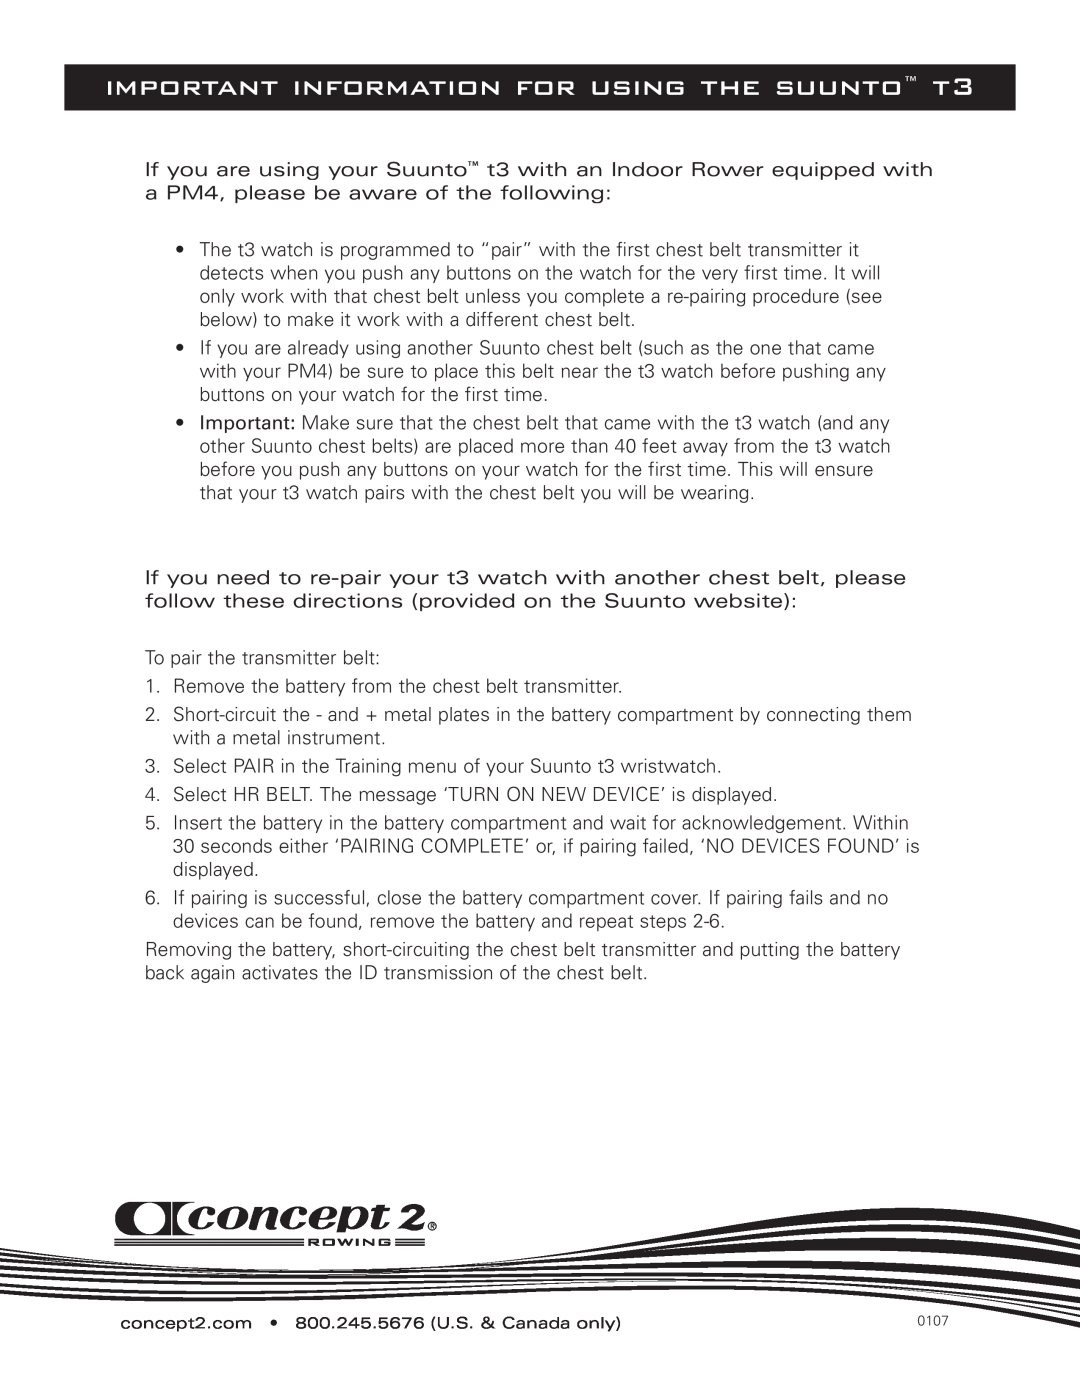 Concept manual important information for using the suunto t3 